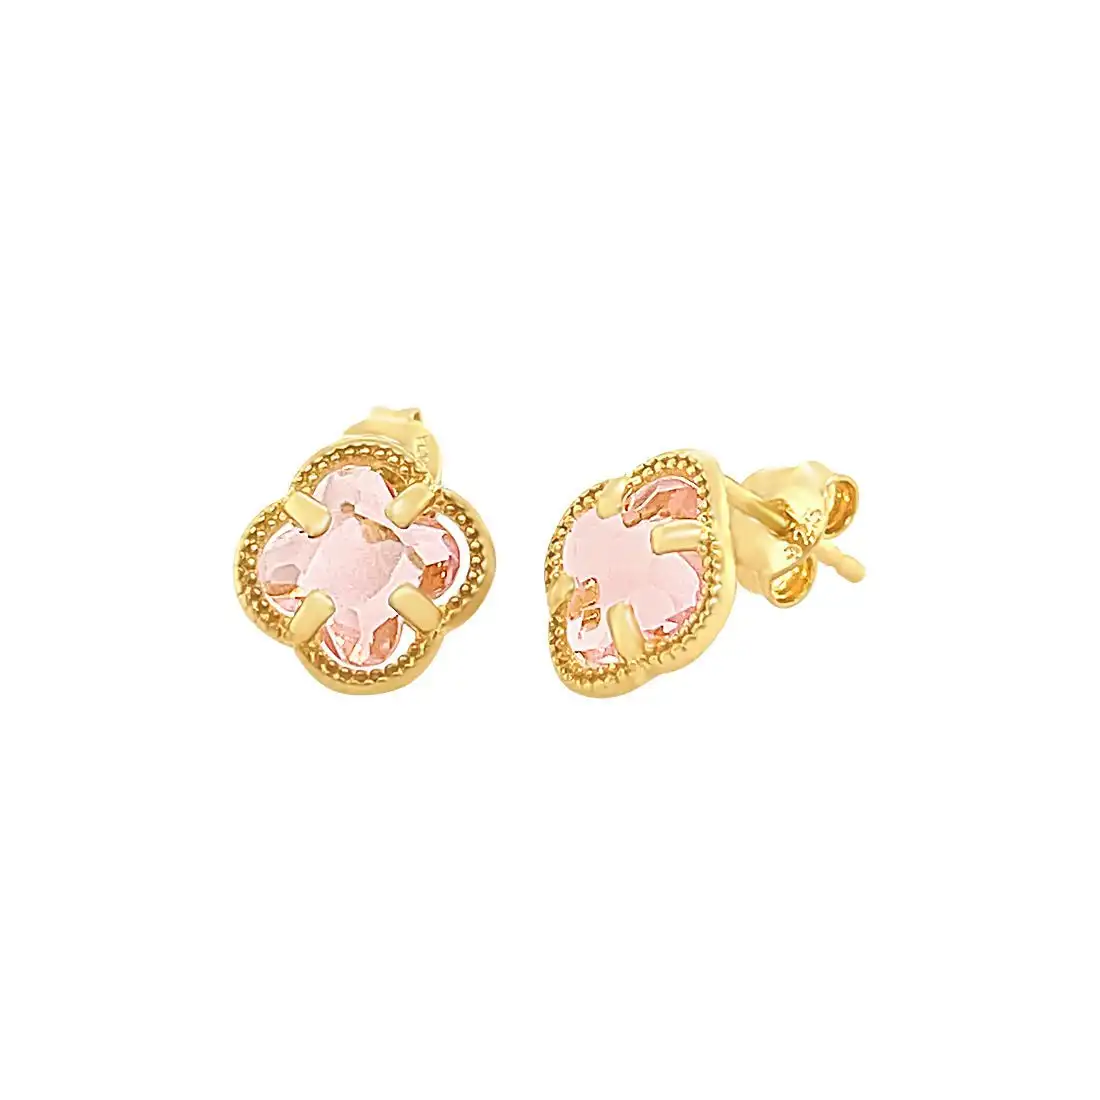 9ct Yellow Gold Silver Infused 4 Leaf Clover Stud Earrings